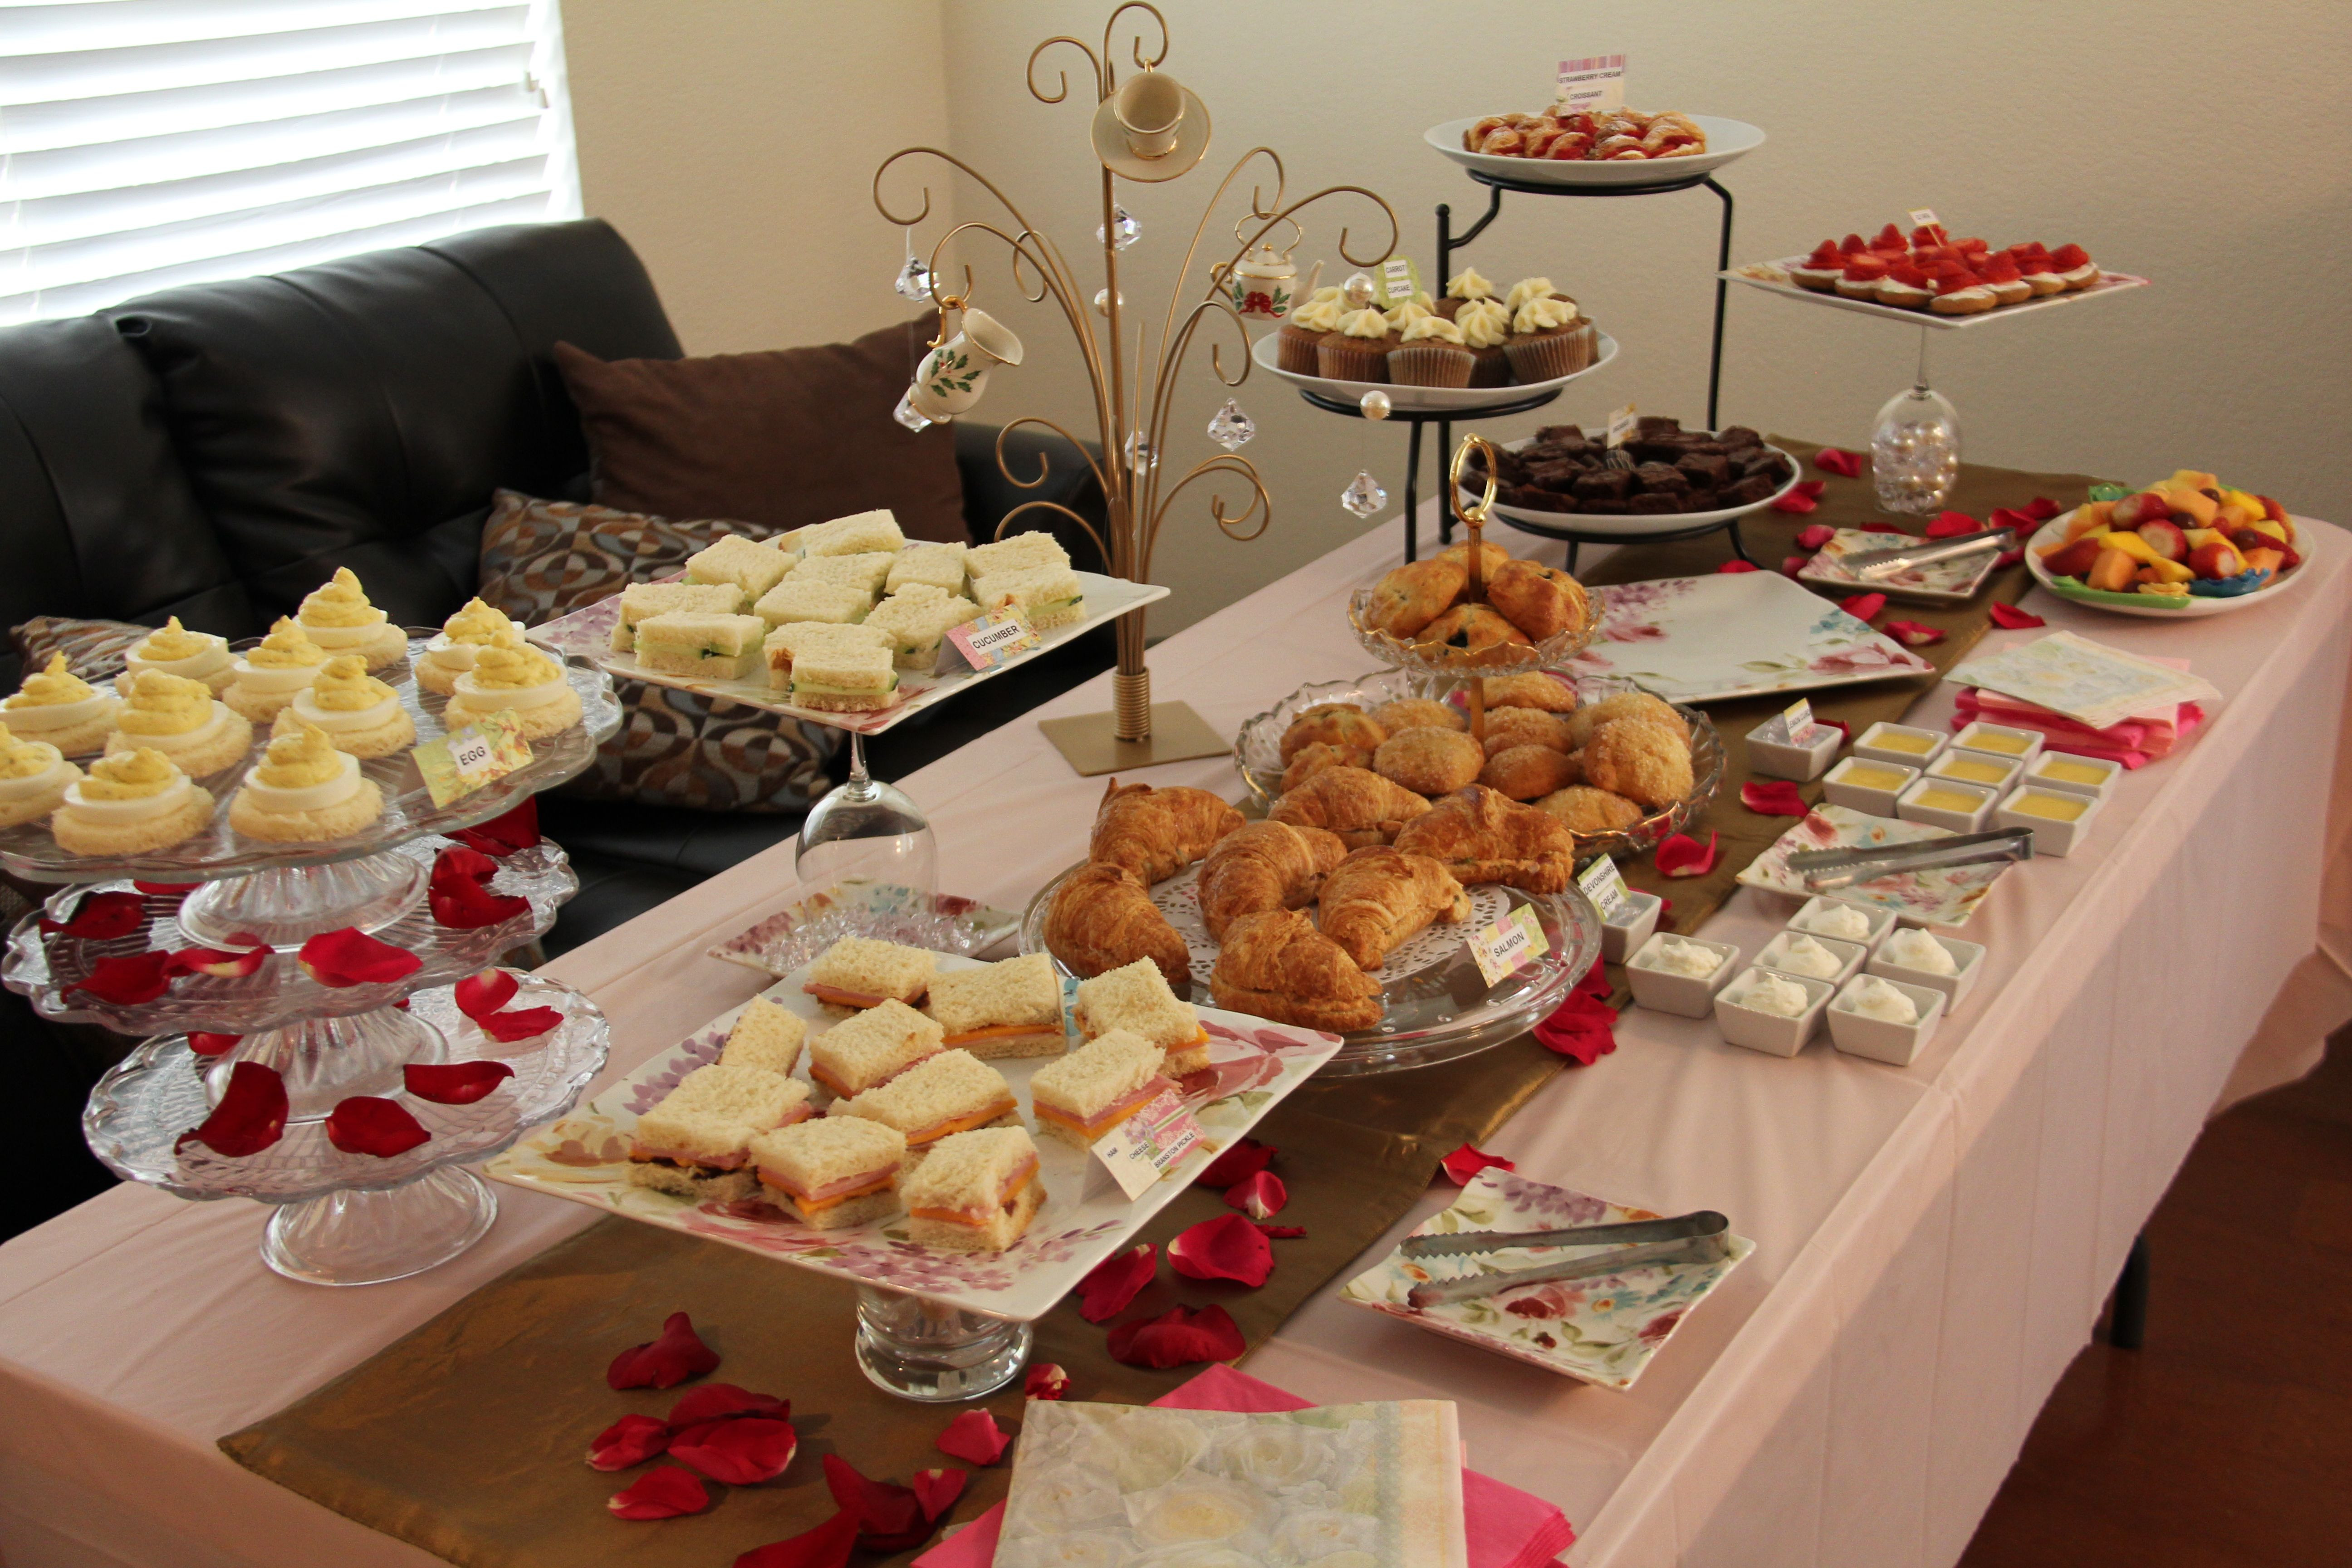 Children'S Party Food Ideas Buffet
 buffet tea party table Our Place in 2019